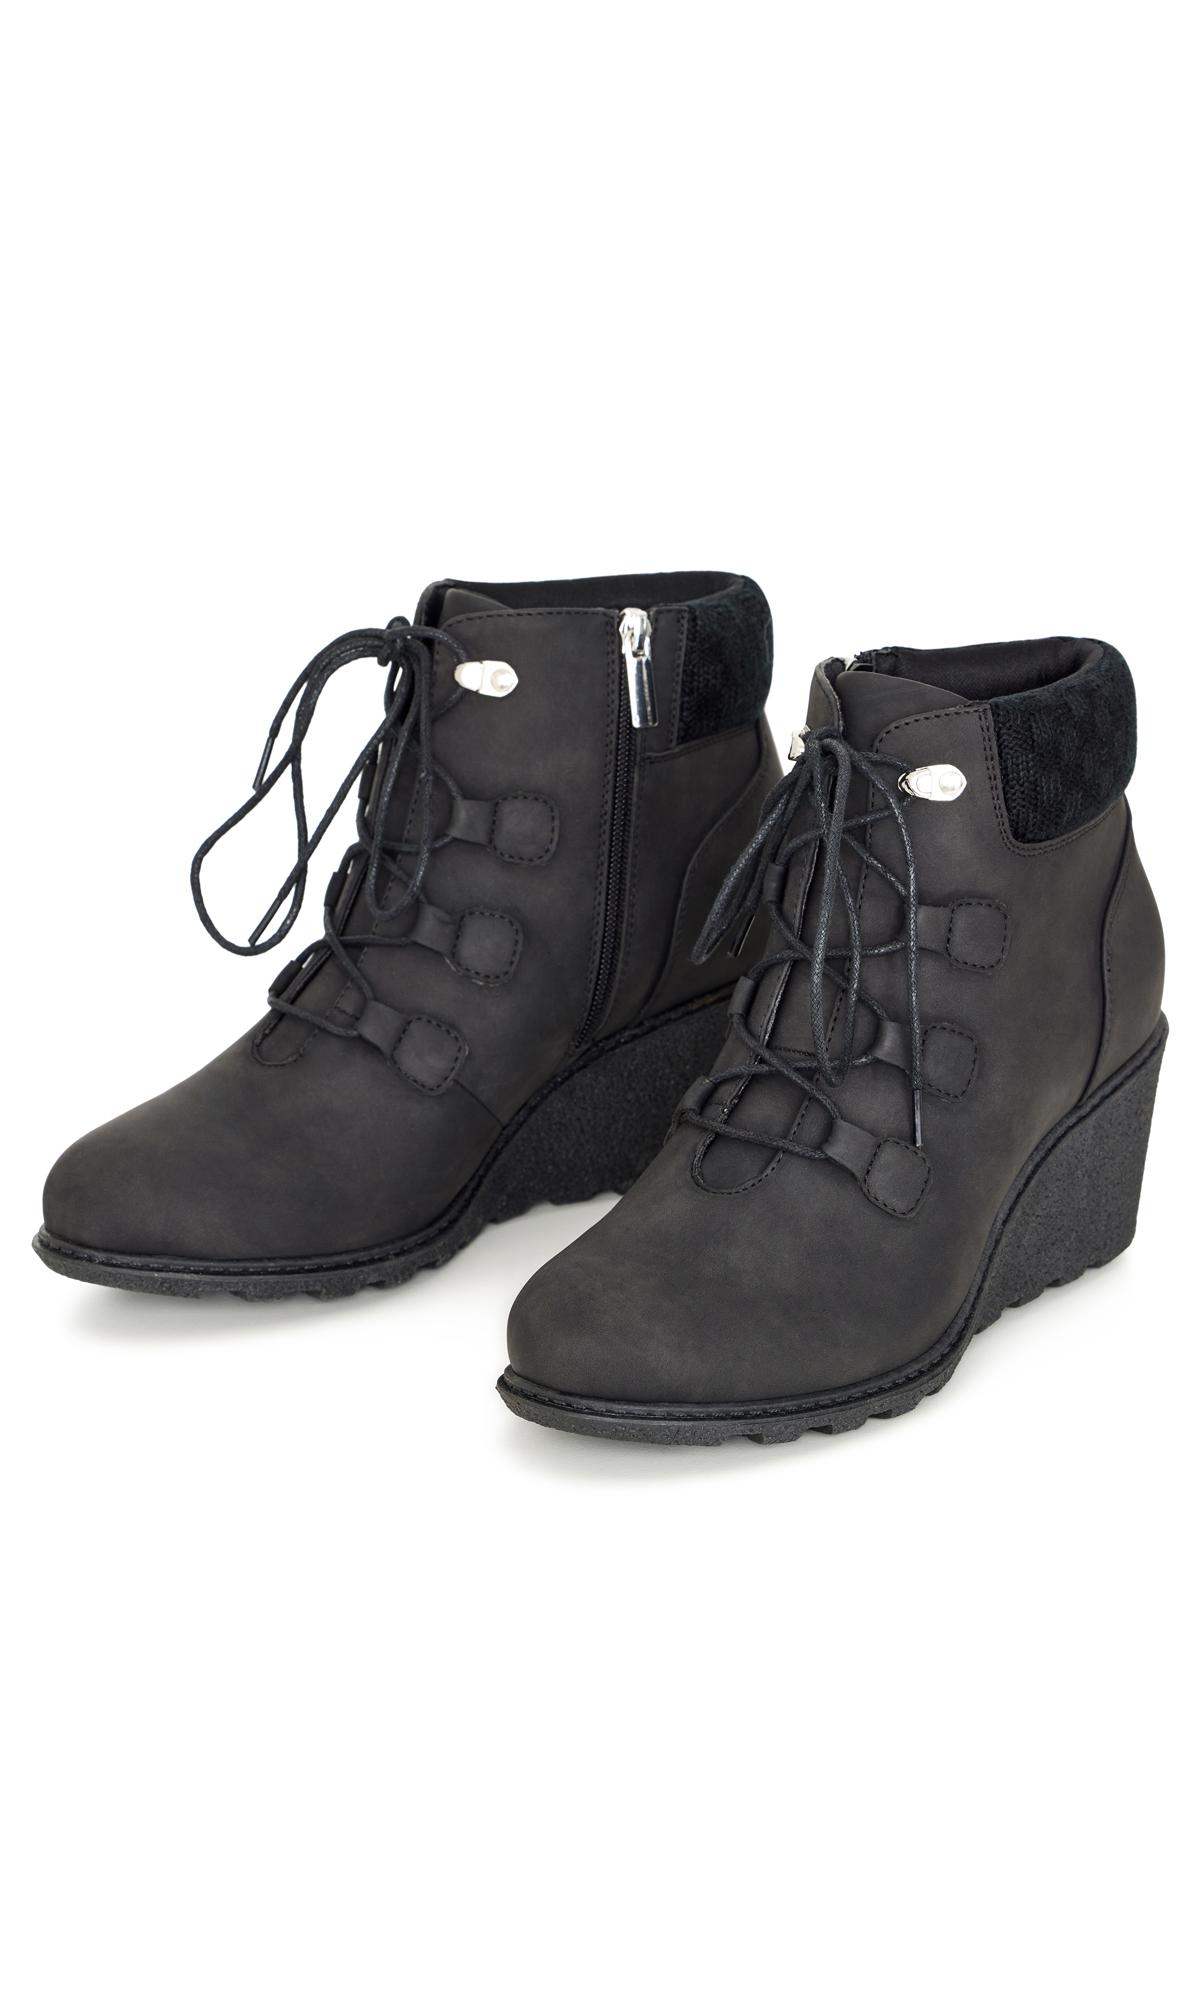 CloudWalkers Black WIDE FIT Quilted Wedge Ankle Boot | Evans